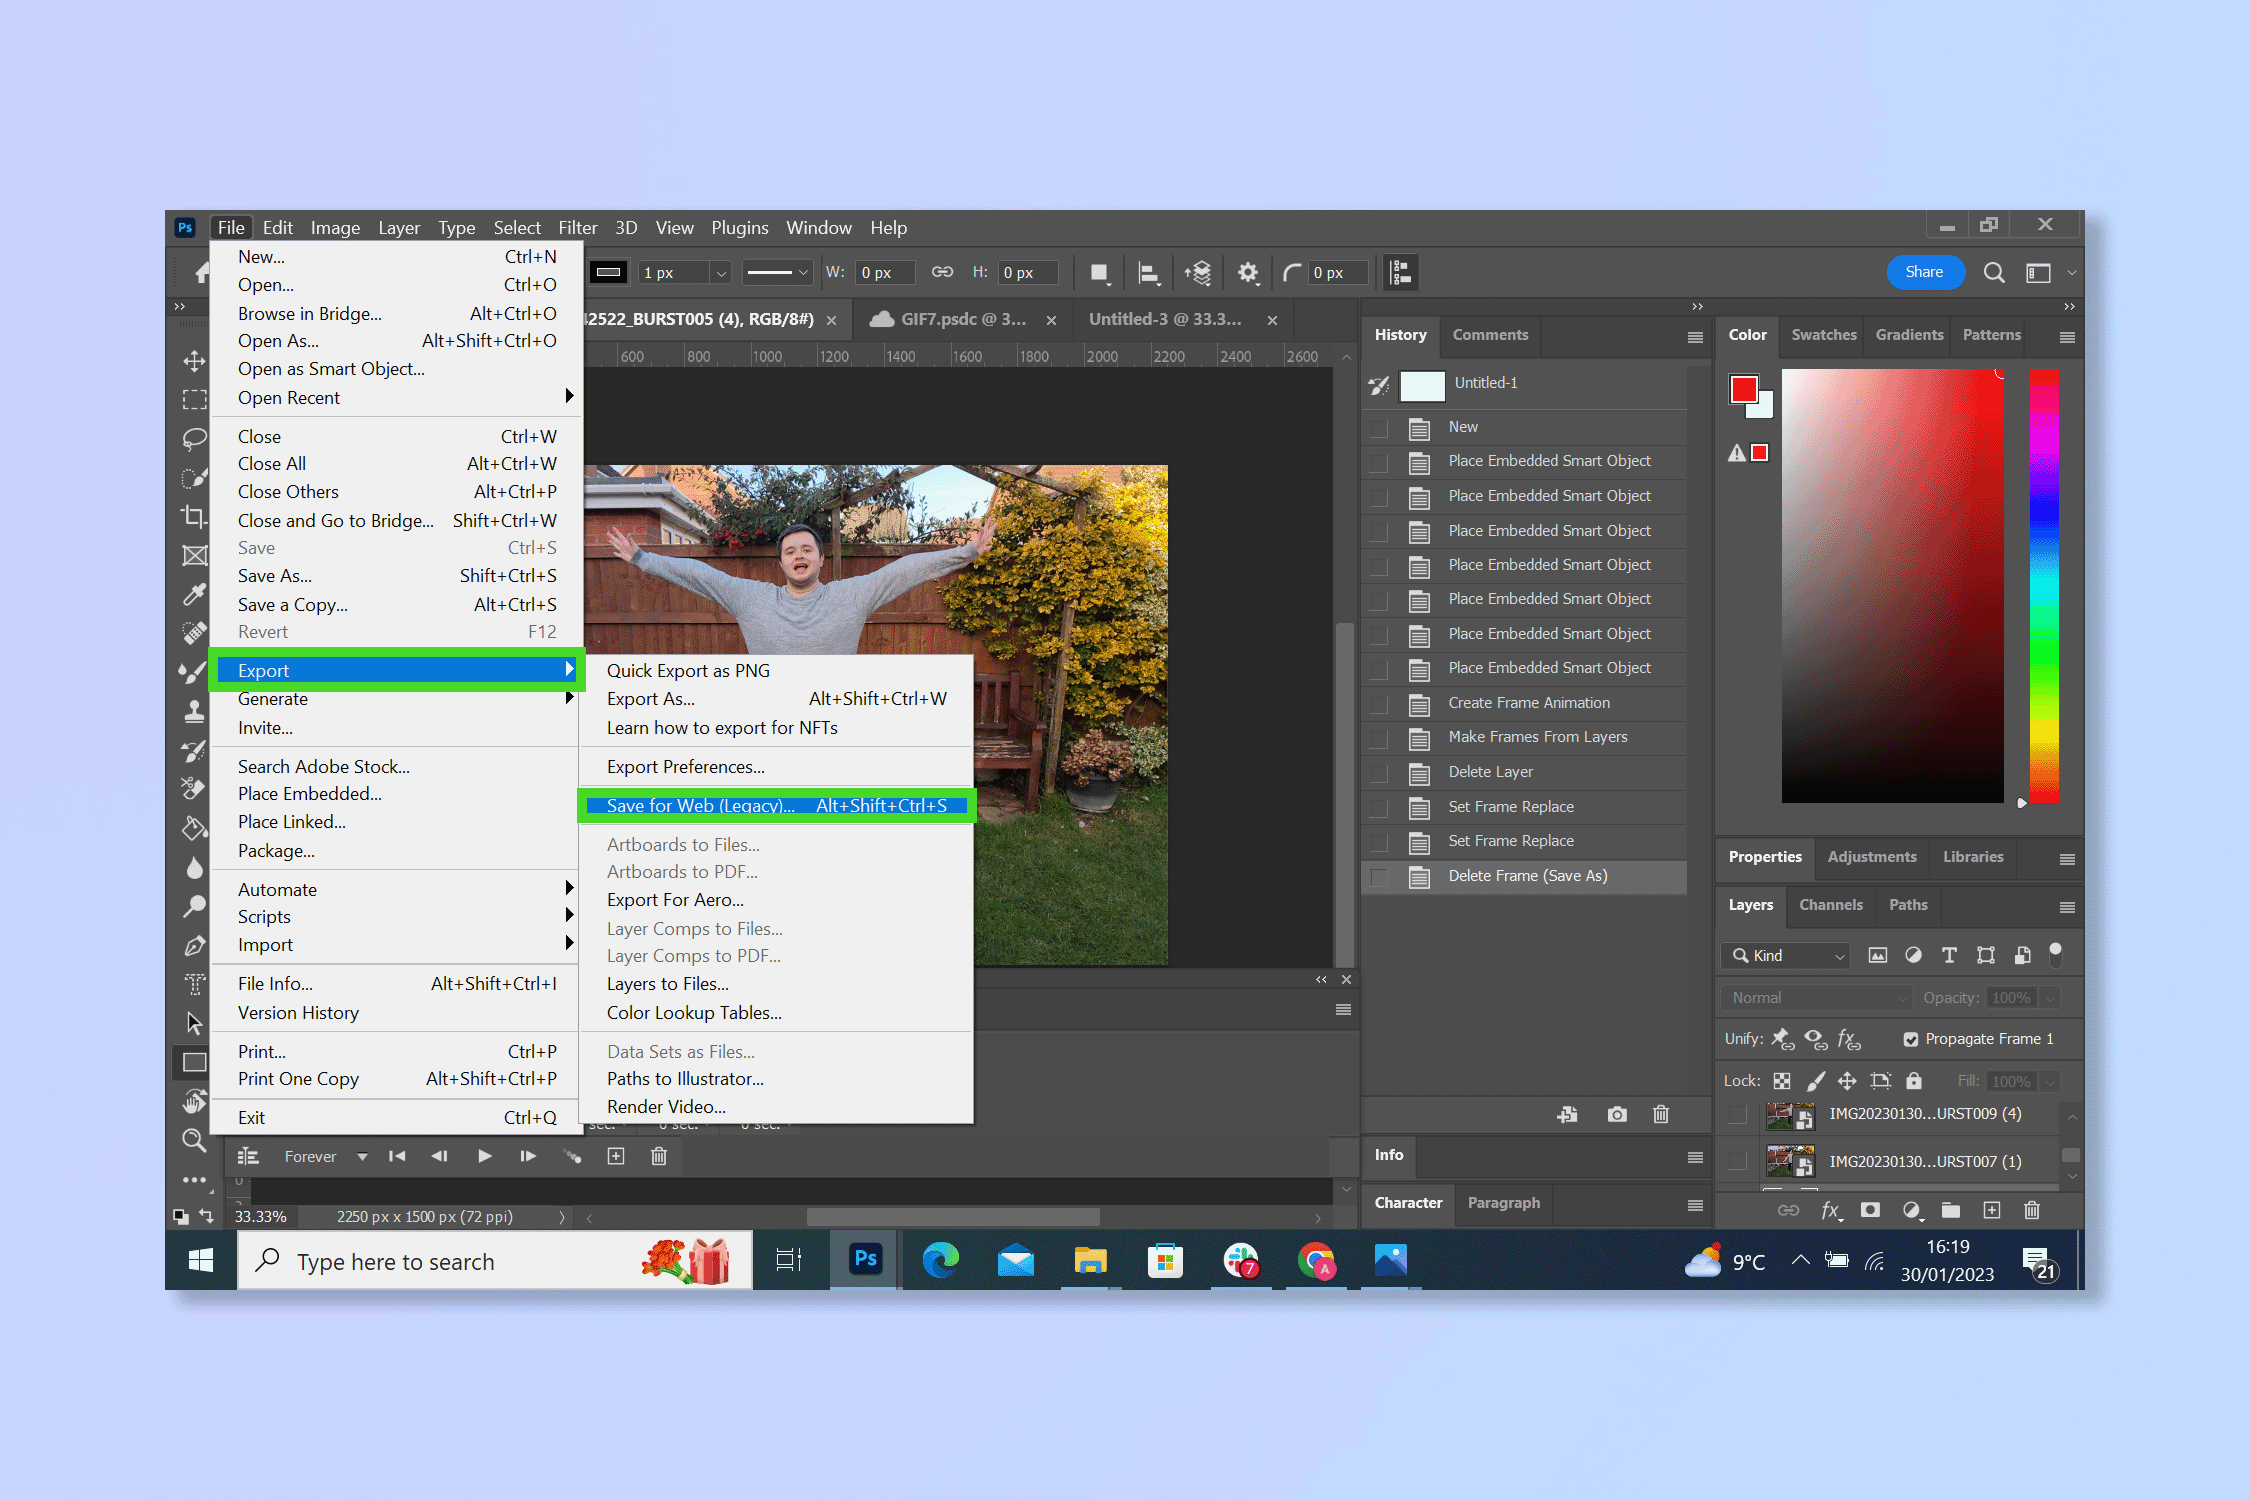 The sixth step is to create a GIF file in Photoshop